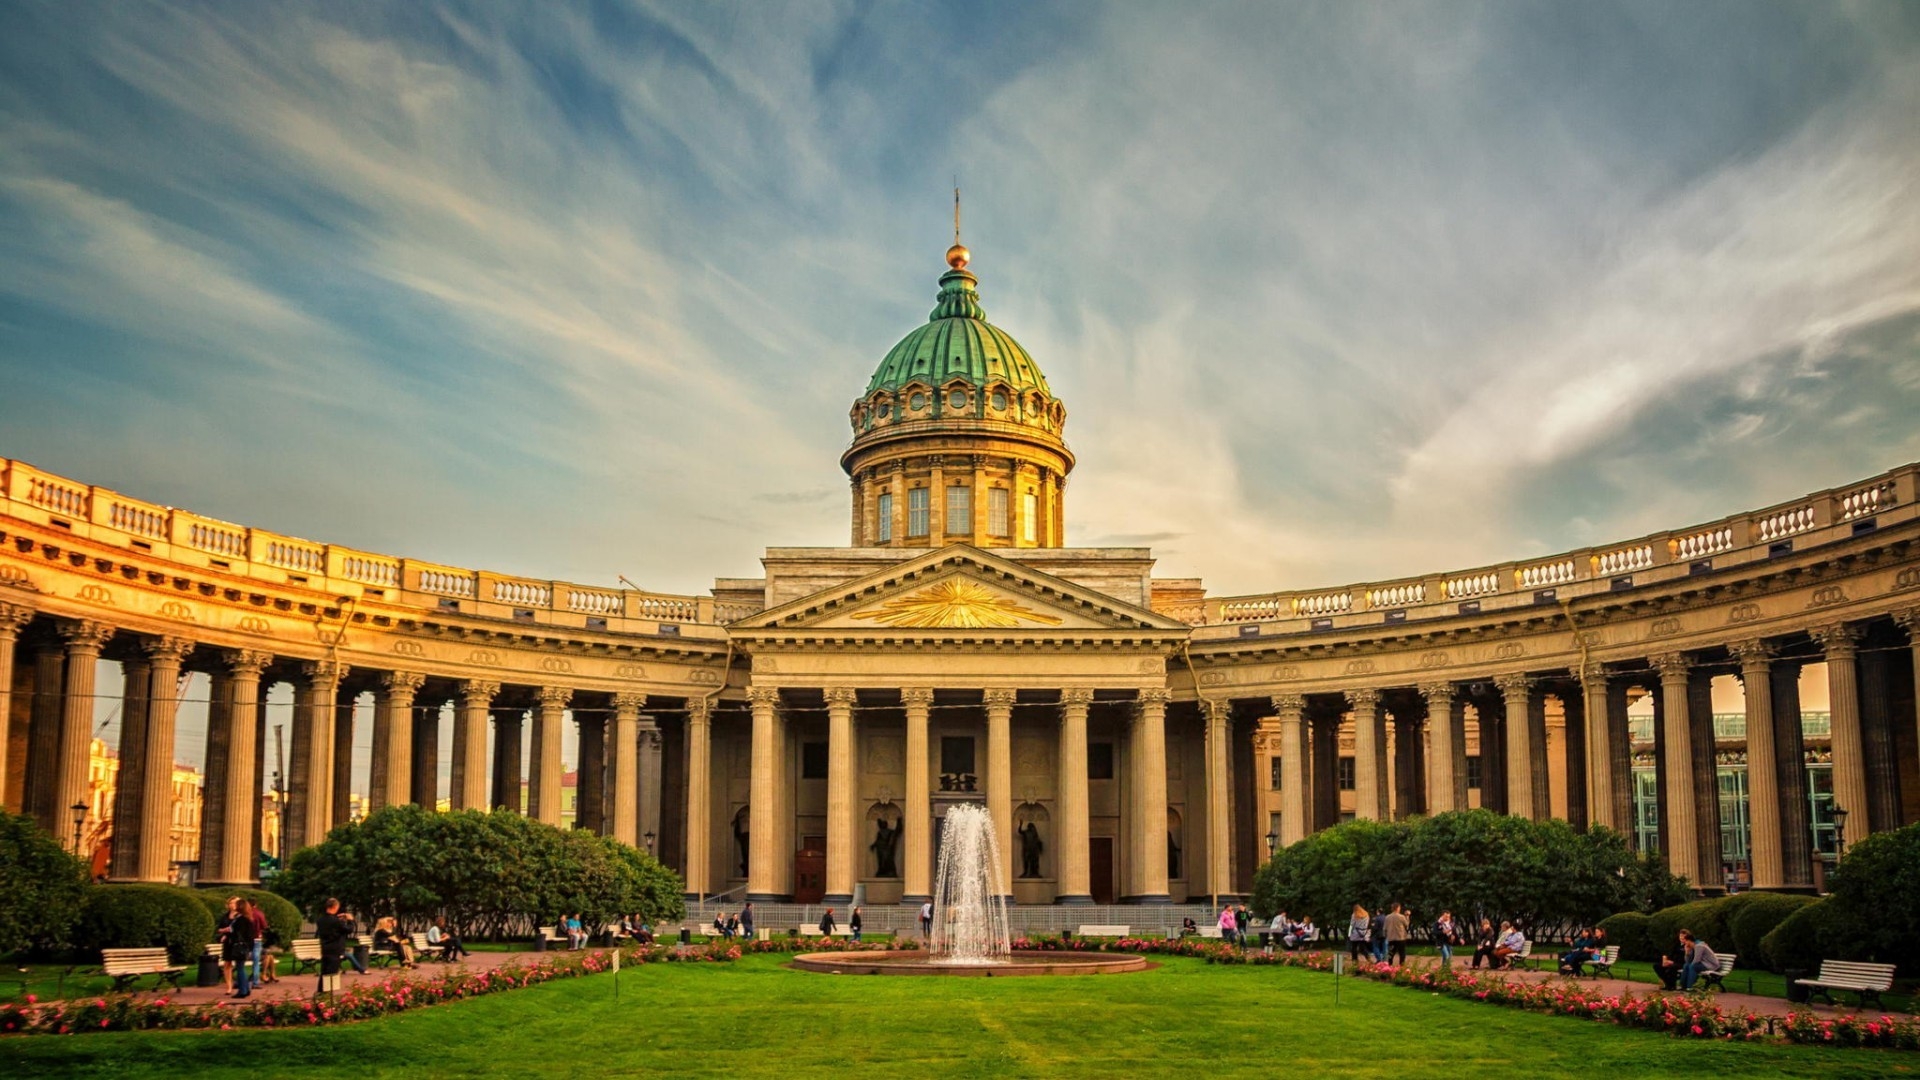 Beautiful Kazan Cathedral St. Petersburg for 1920 x 1080 HDTV 1080p resolution